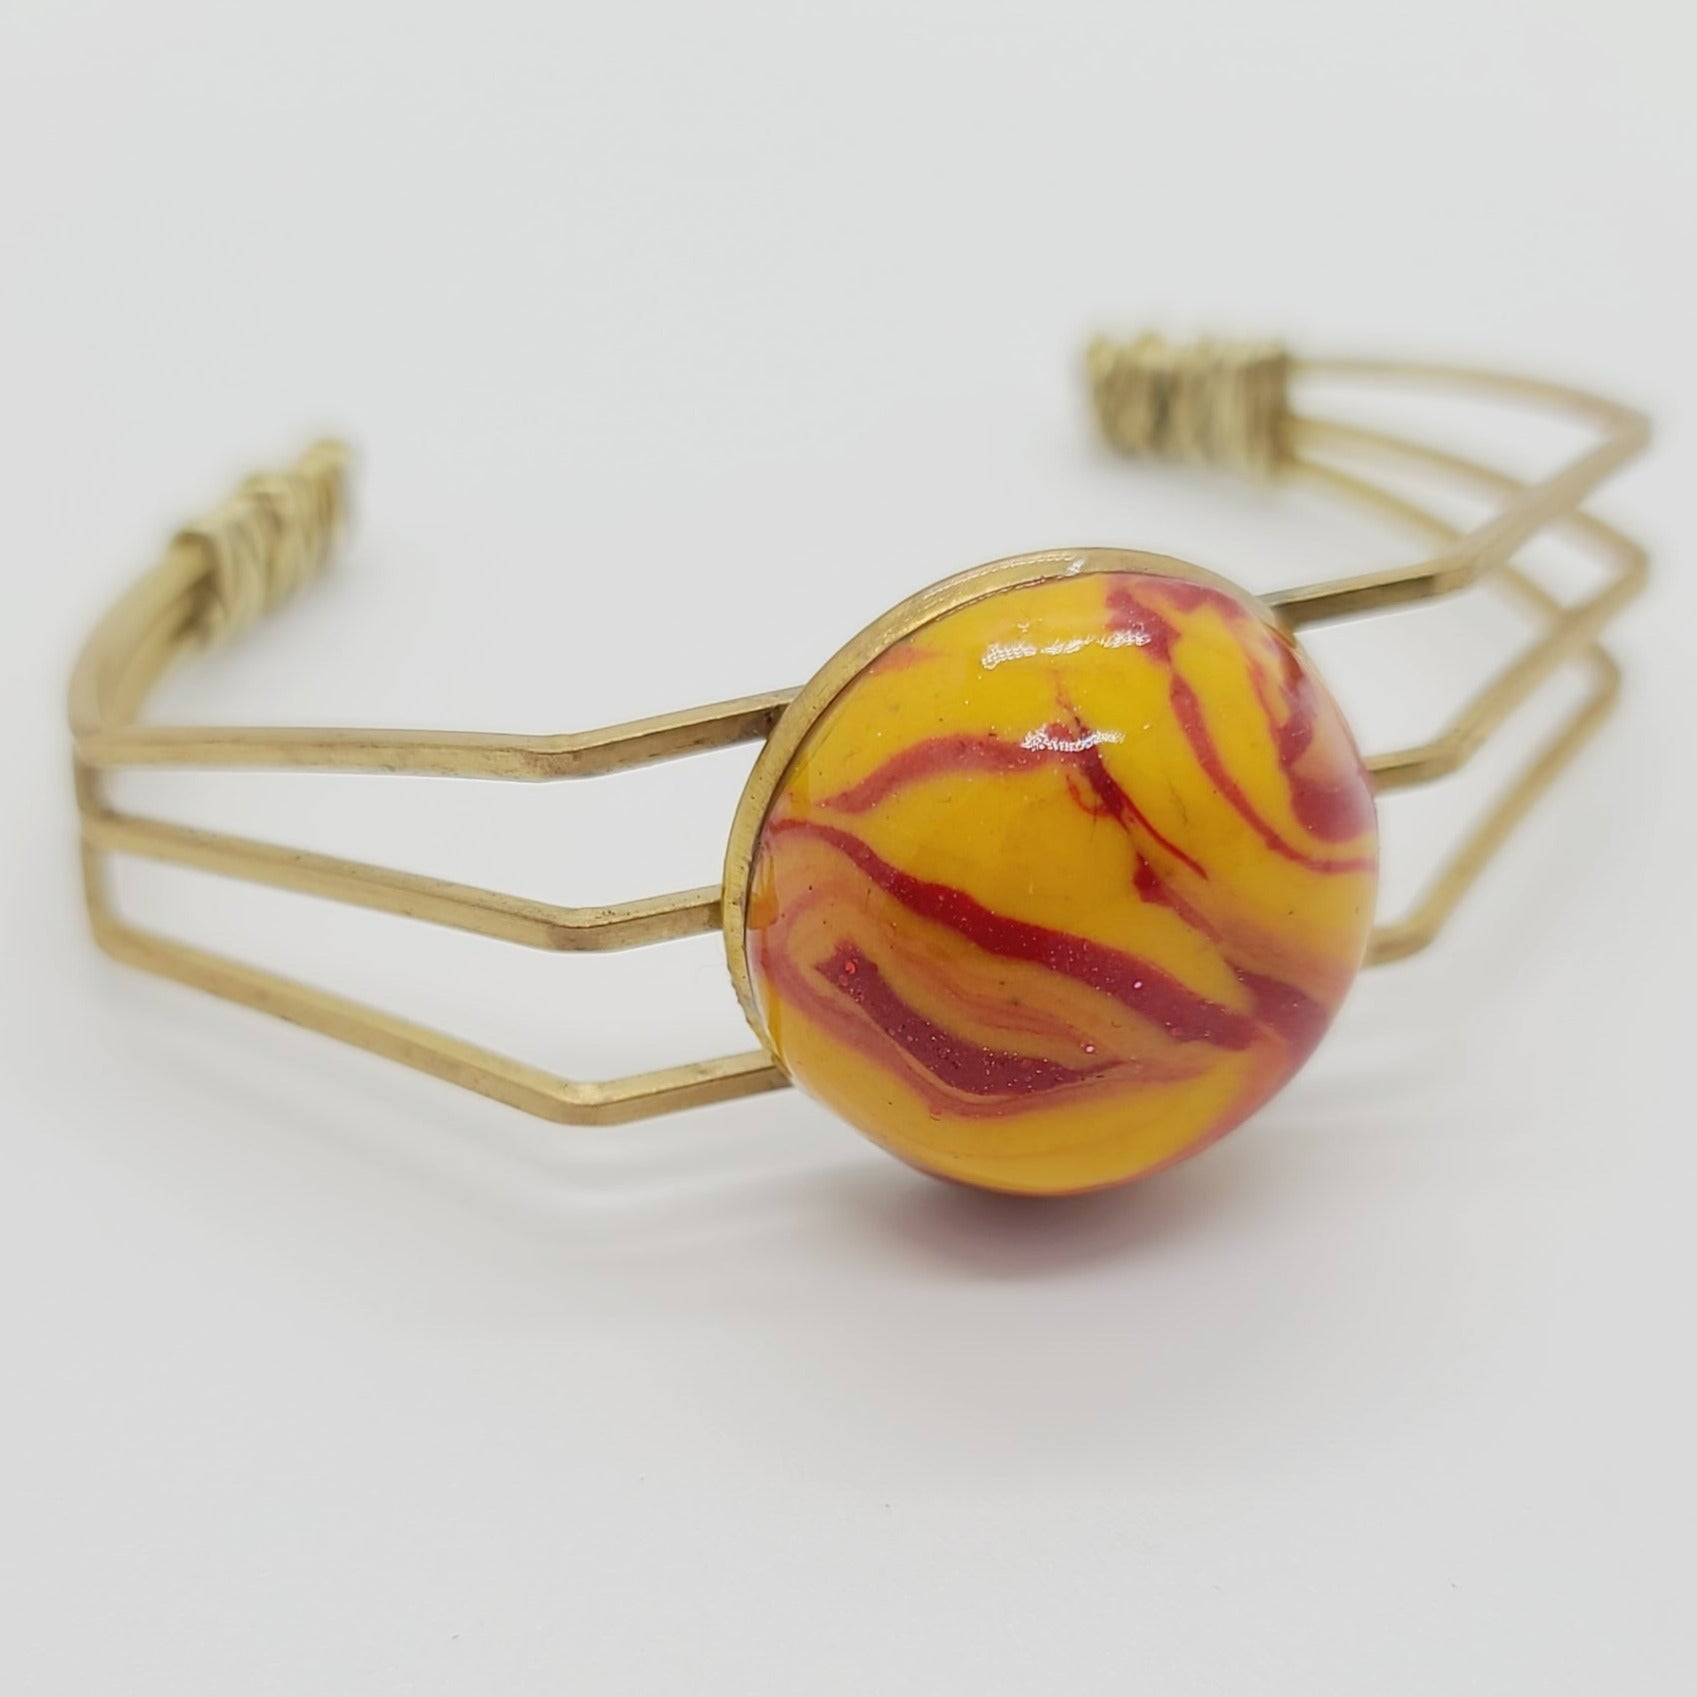 Length: 6.75 inches | Weight: 0.6 ounces  Distinctly You! This brass metal bracelet is made with red and gold swirl polymer clay stone covered in resin.